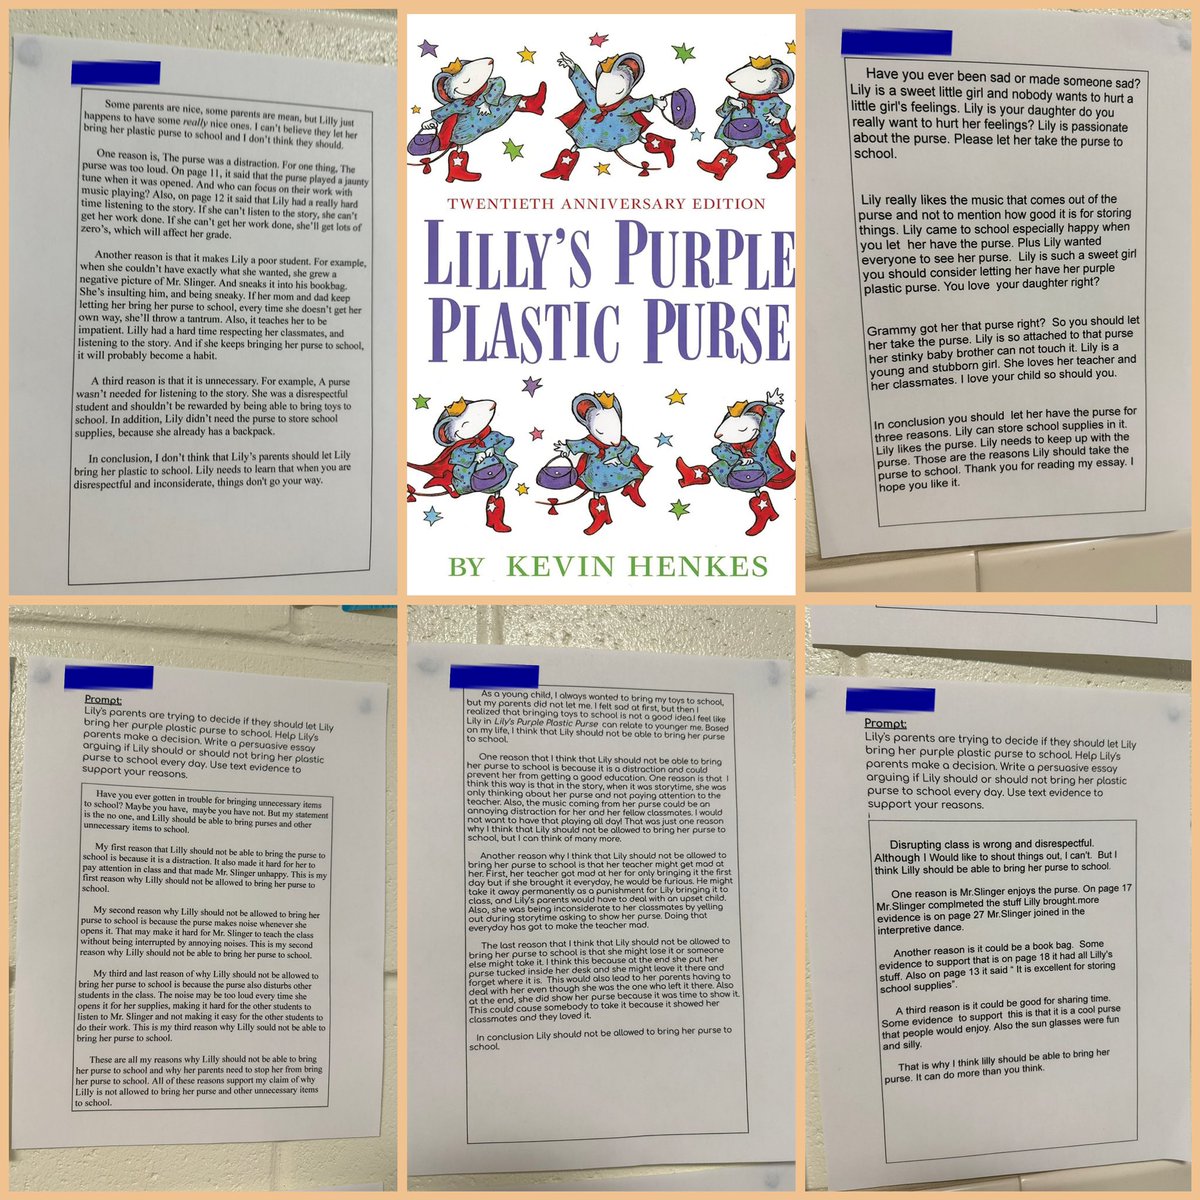 3rd graders in Mrs. Boyd’s RELA classes wrote a persuasive essay arguing if Lily should or should not bring her purple plastic purse to school every day. They used text evidence to support their reasons. 💜 Great writing! 💙🐯💛@gwes_pta @PGCPSTAG @PGCPSK5RELA @PGCPSCurriculum